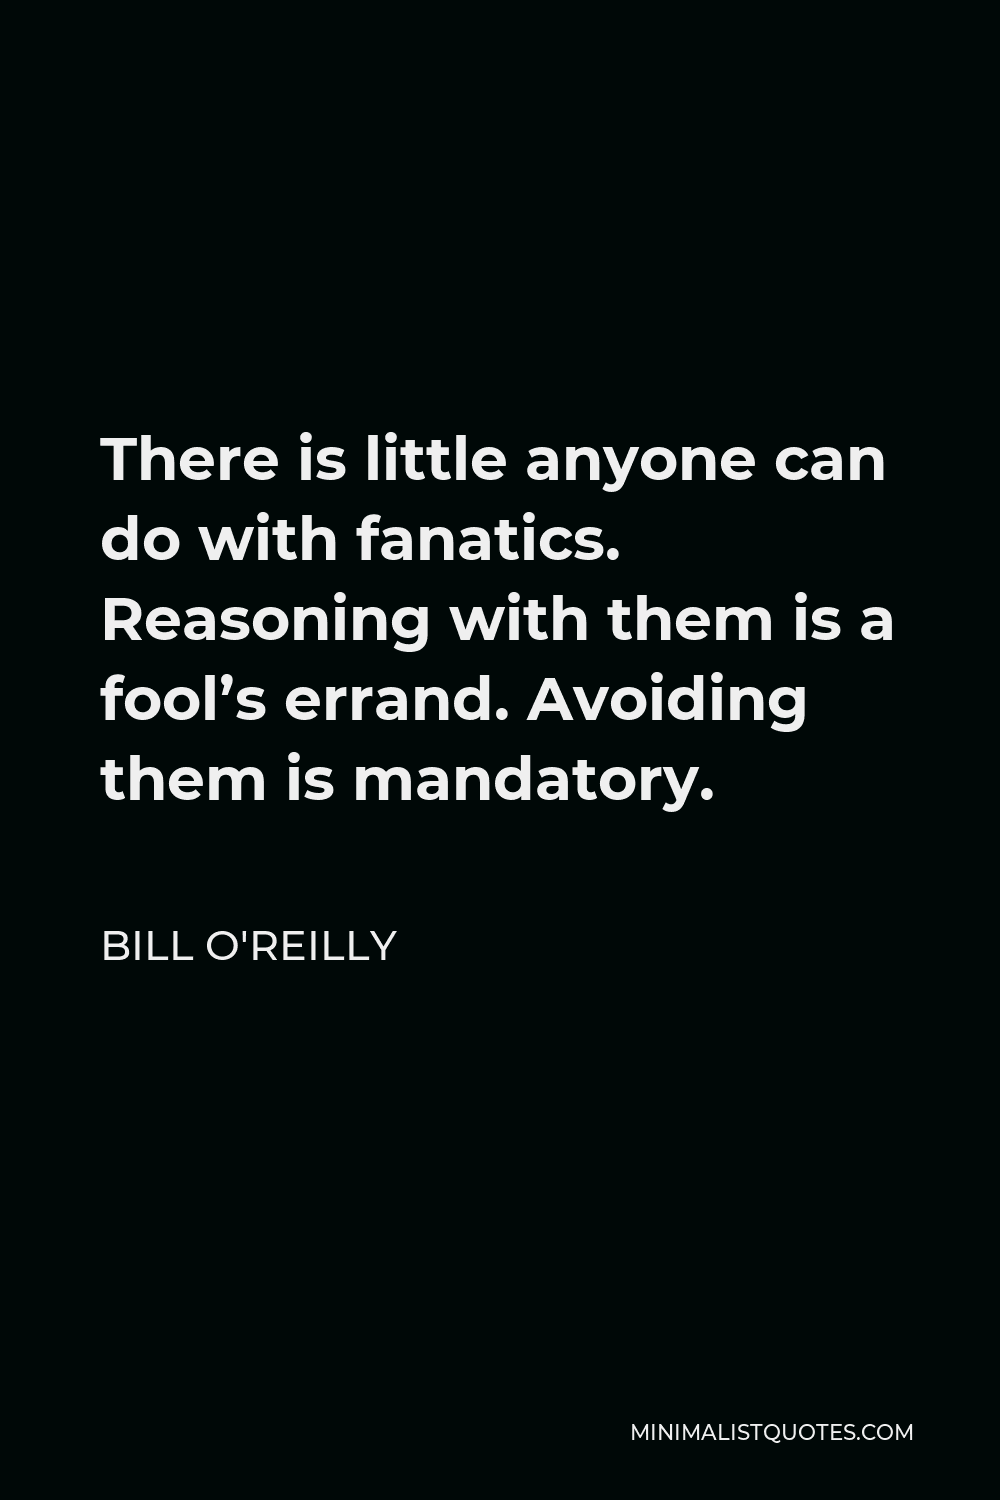 Bill O'Reilly Quote - There is little anyone can do with fanatics. Reasoning with them is a fool’s errand. Avoiding them is mandatory.